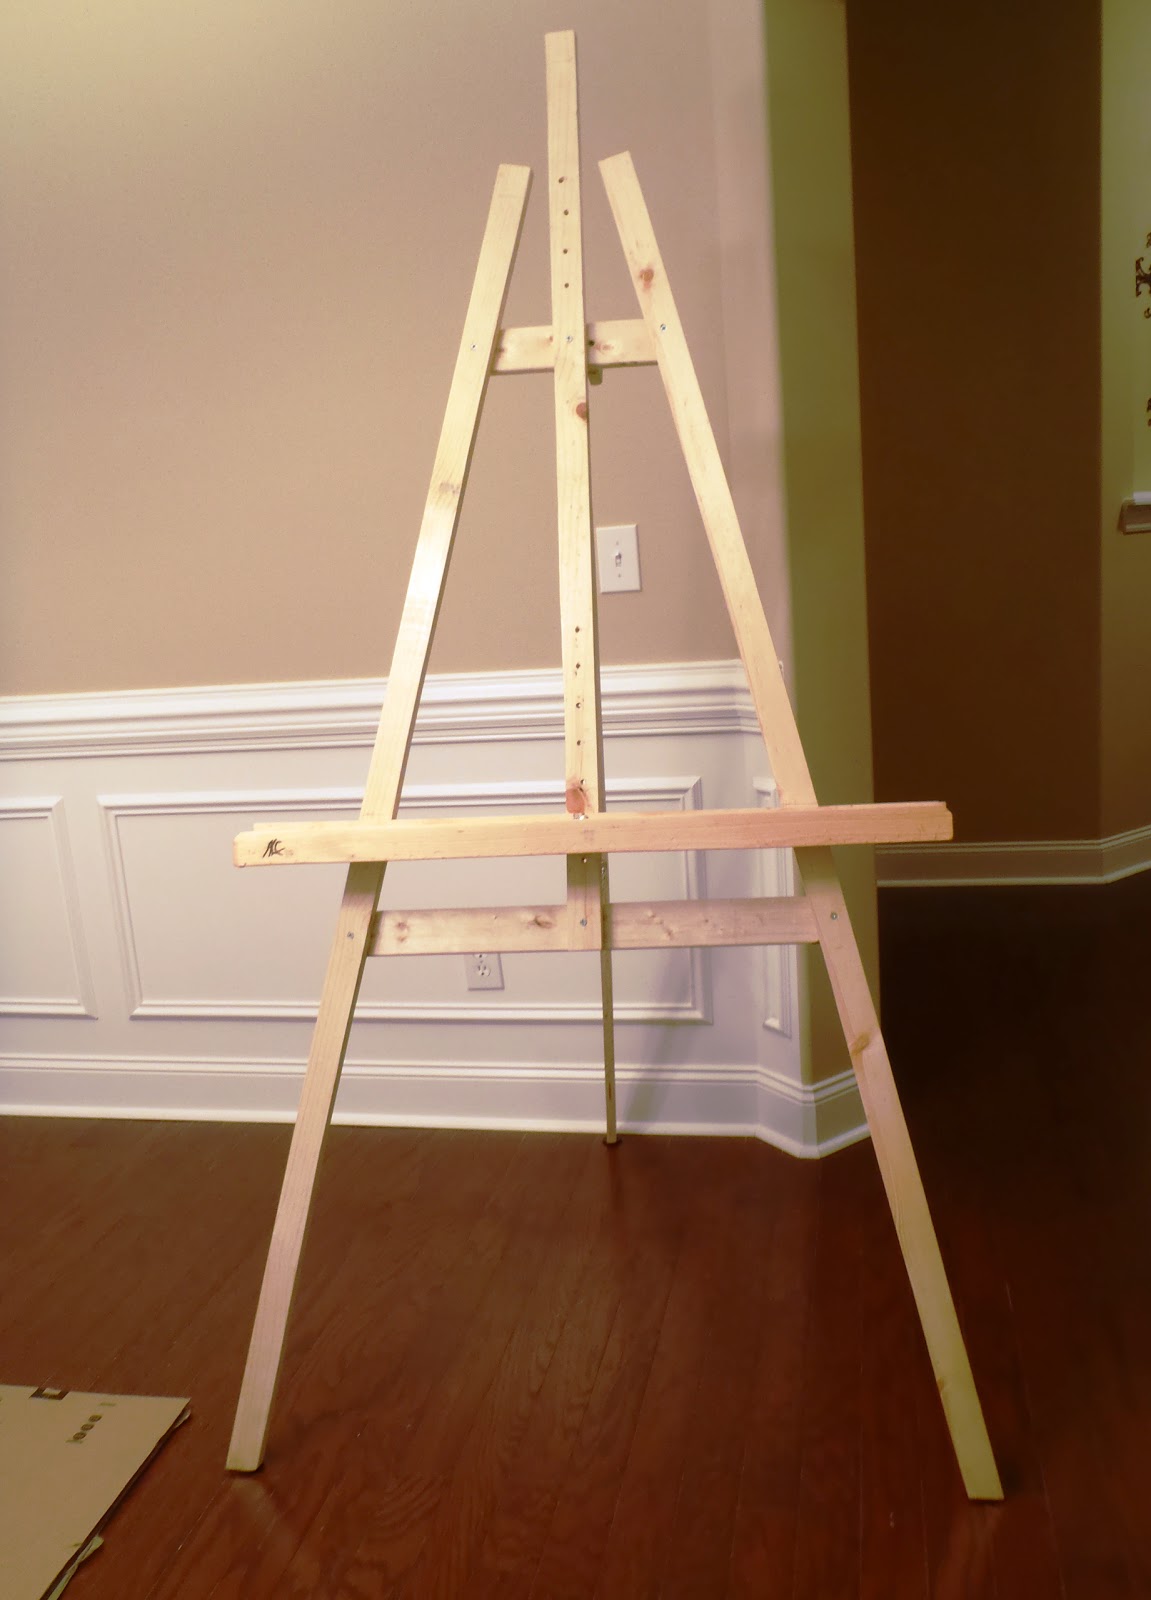 Easels are just three-legged stand but are expensive when buying the 